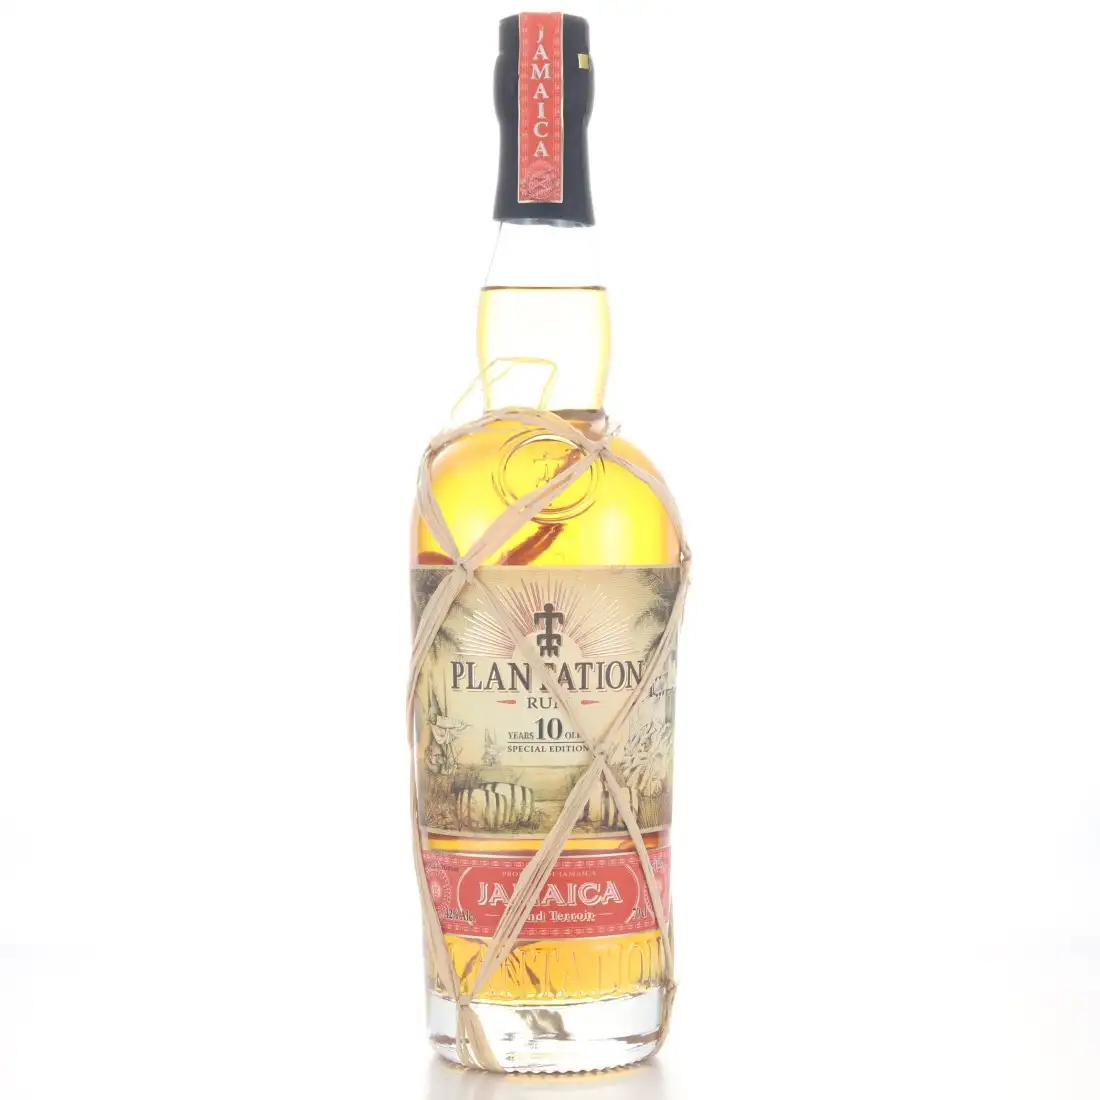 Image of the front of the bottle of the rum Plantation Jamaica Grand Terroir